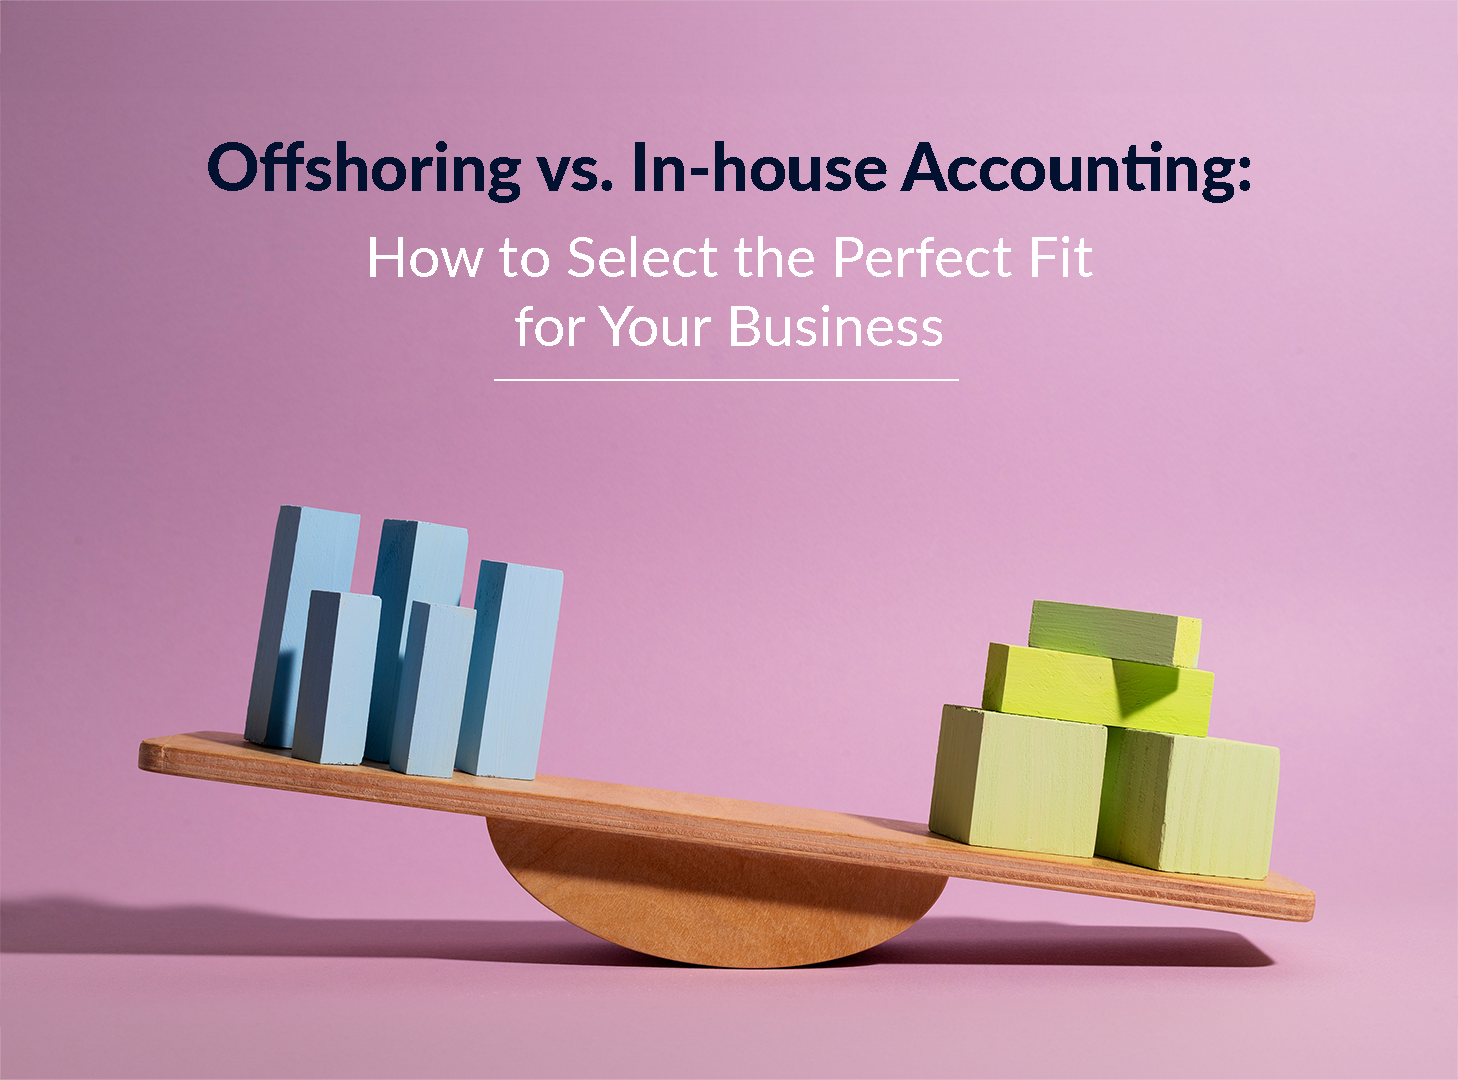 Offshoring vs. In-house Accounting | How to Select the Perfect Fit for Your Business